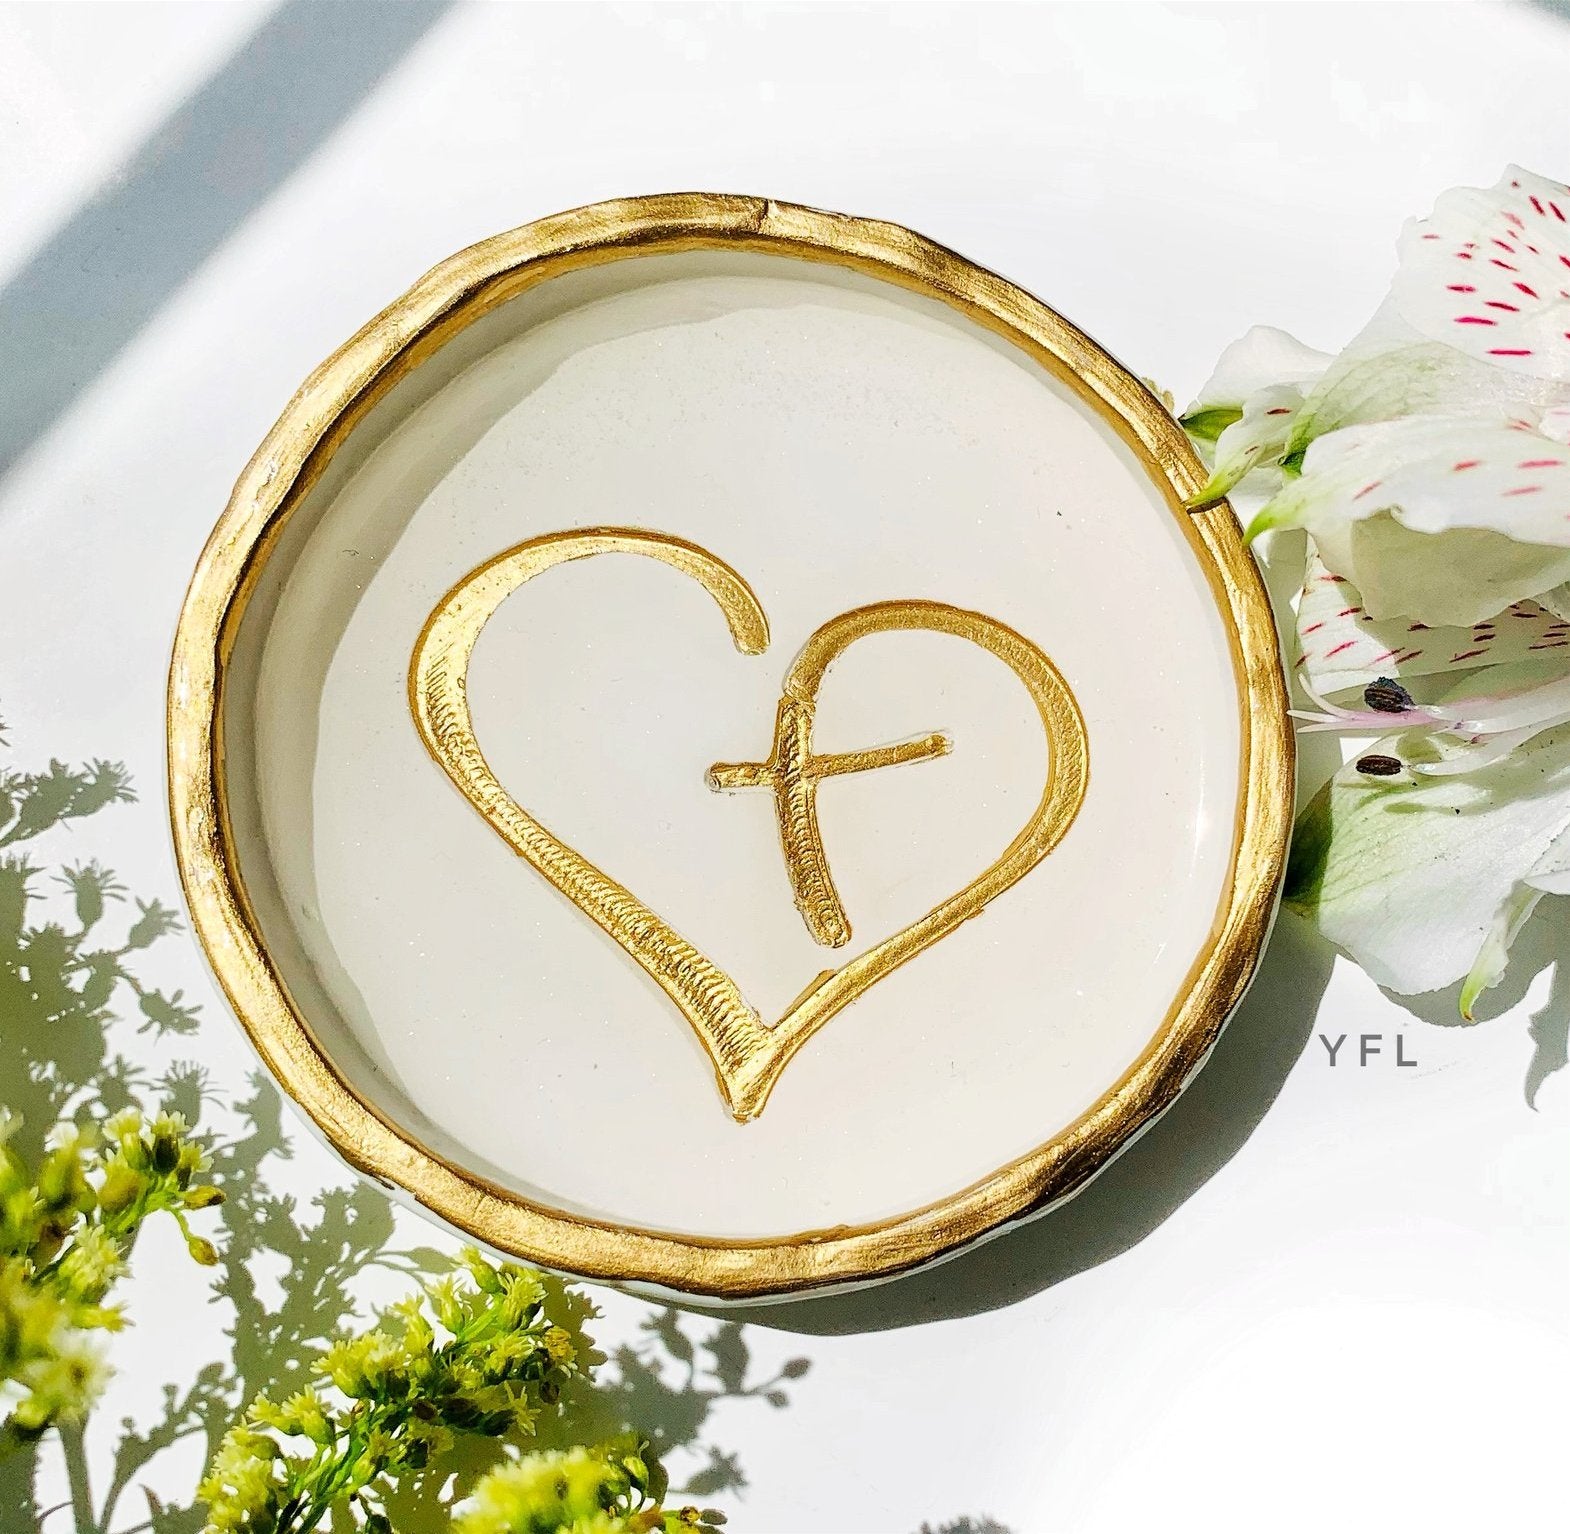 Cross Heart baptism communion religious gift Jewelry Dish | Ring Dish | Trinket Dish| Wedding Gift | Engagement Gift | Anniversary Gift | Bridal Shower | Housewarming | Gift for Her | Mother’s Day Teachers gift, Retirement gift, coworker gift